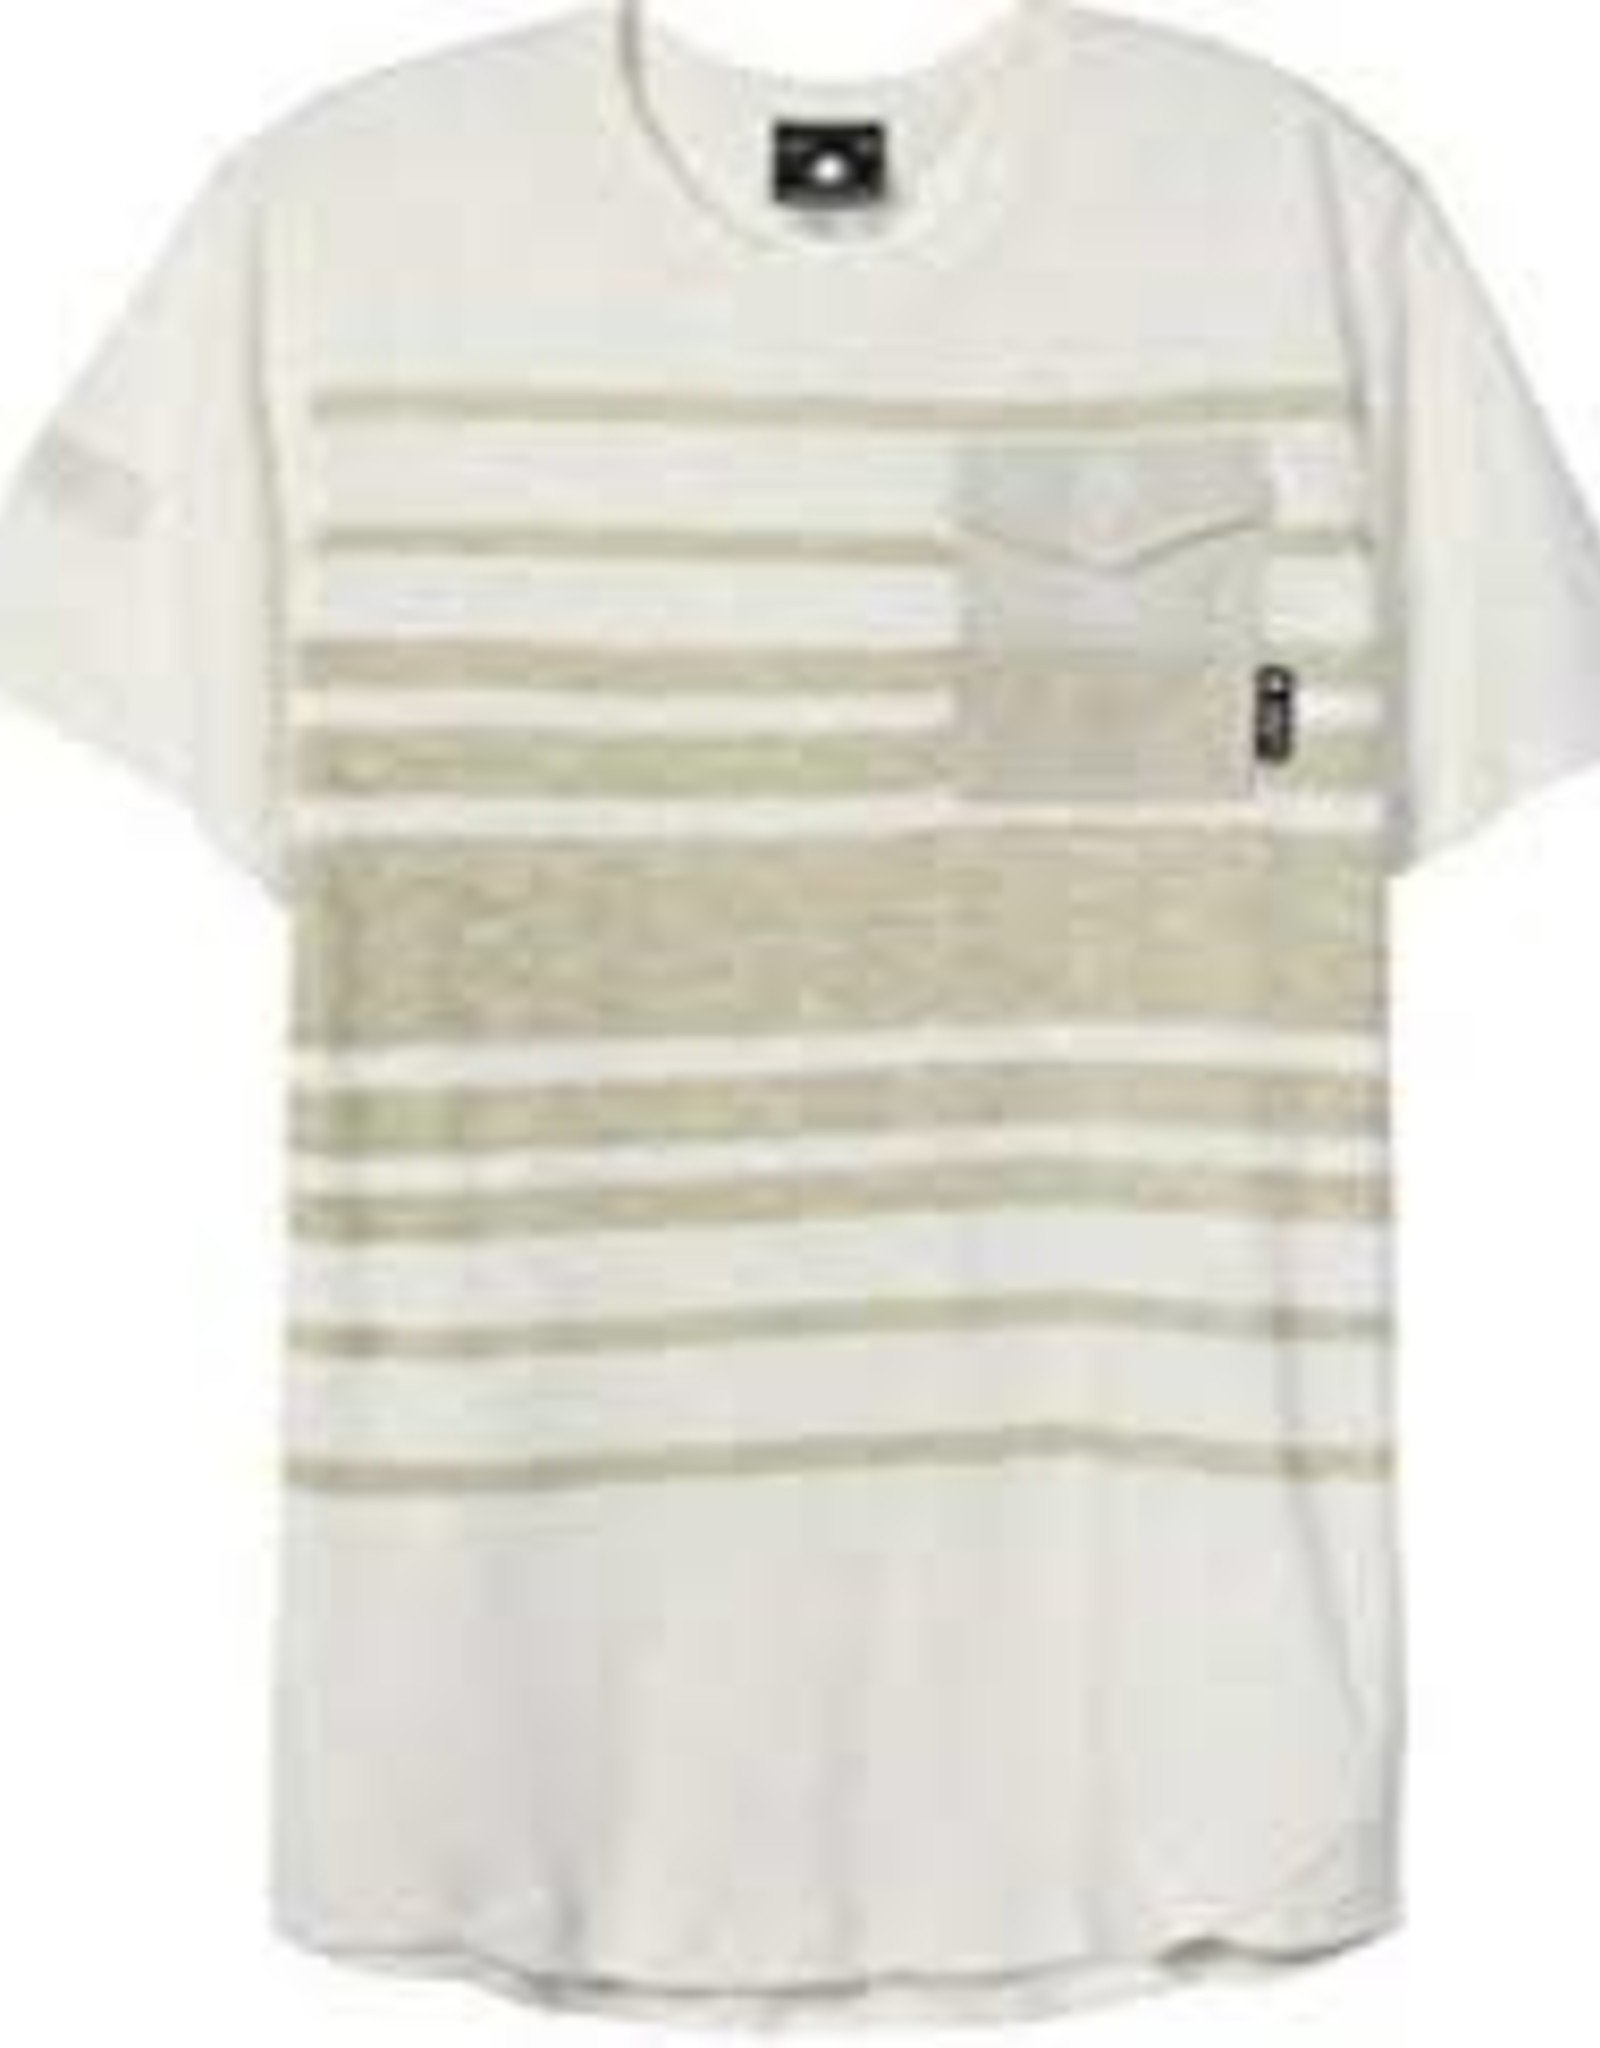 Lifted Research Group DryLake Stripe Knit MD